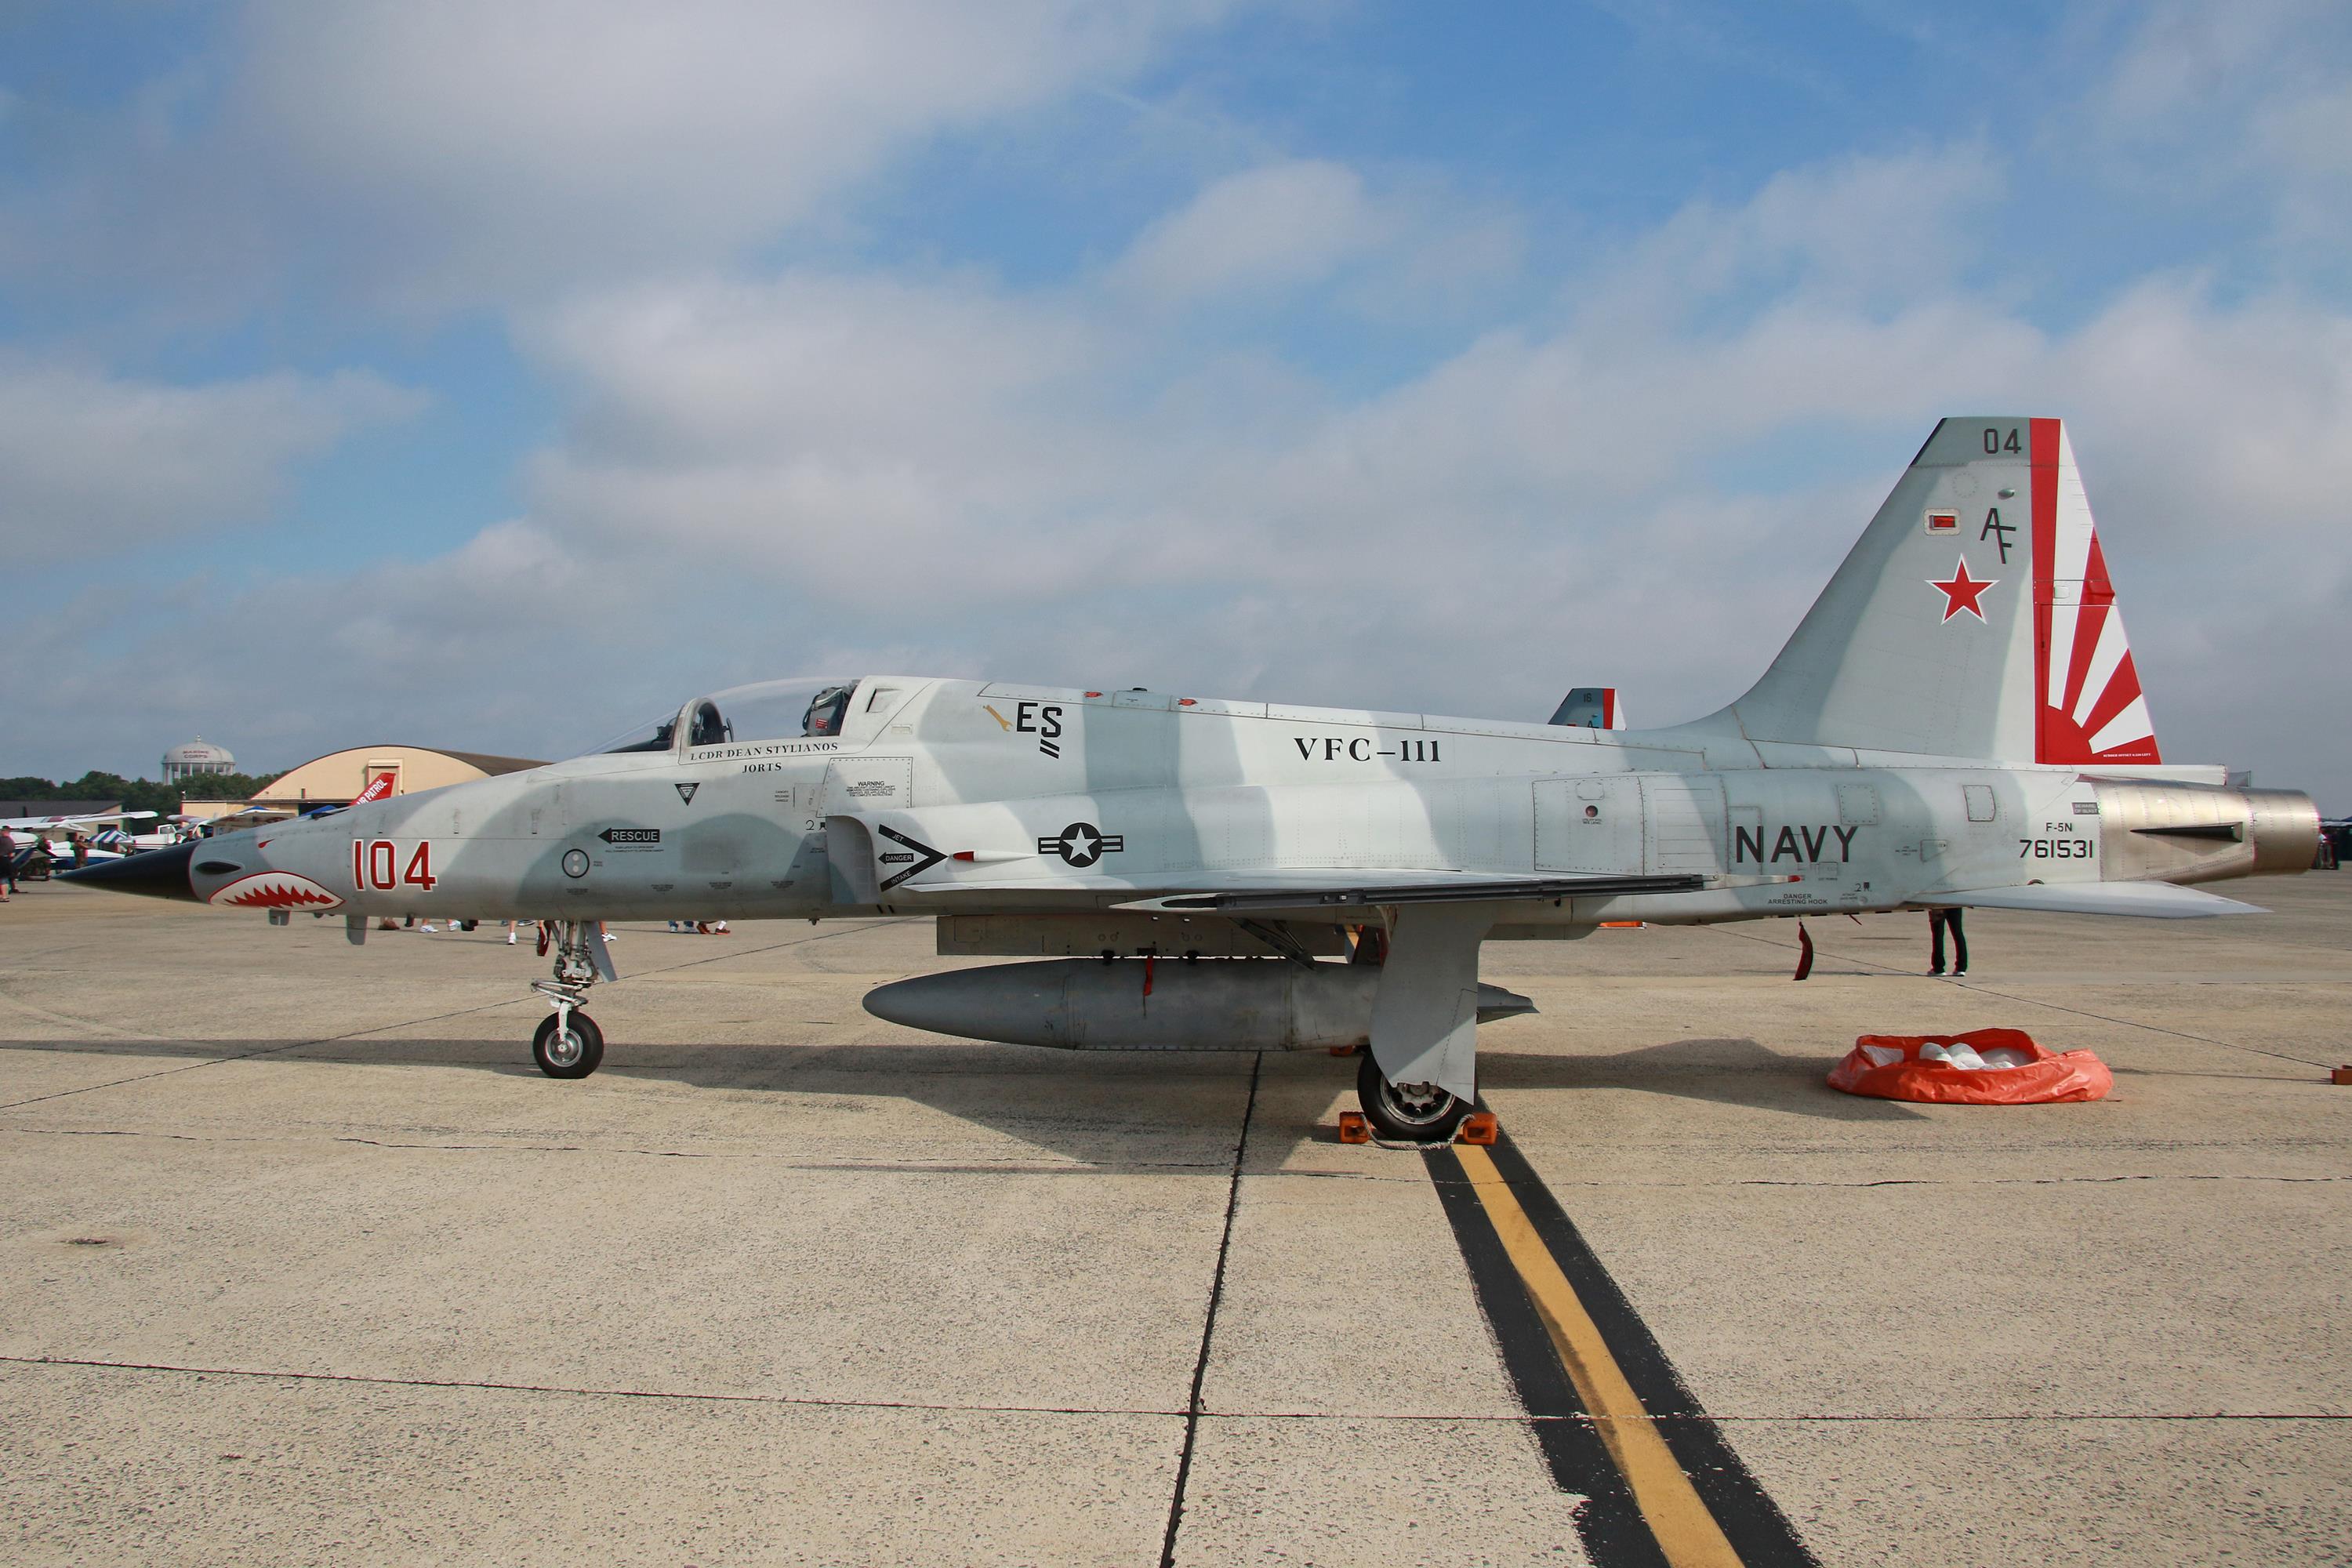 Joint Base Andrews Air Show 2015 (MD, USA)